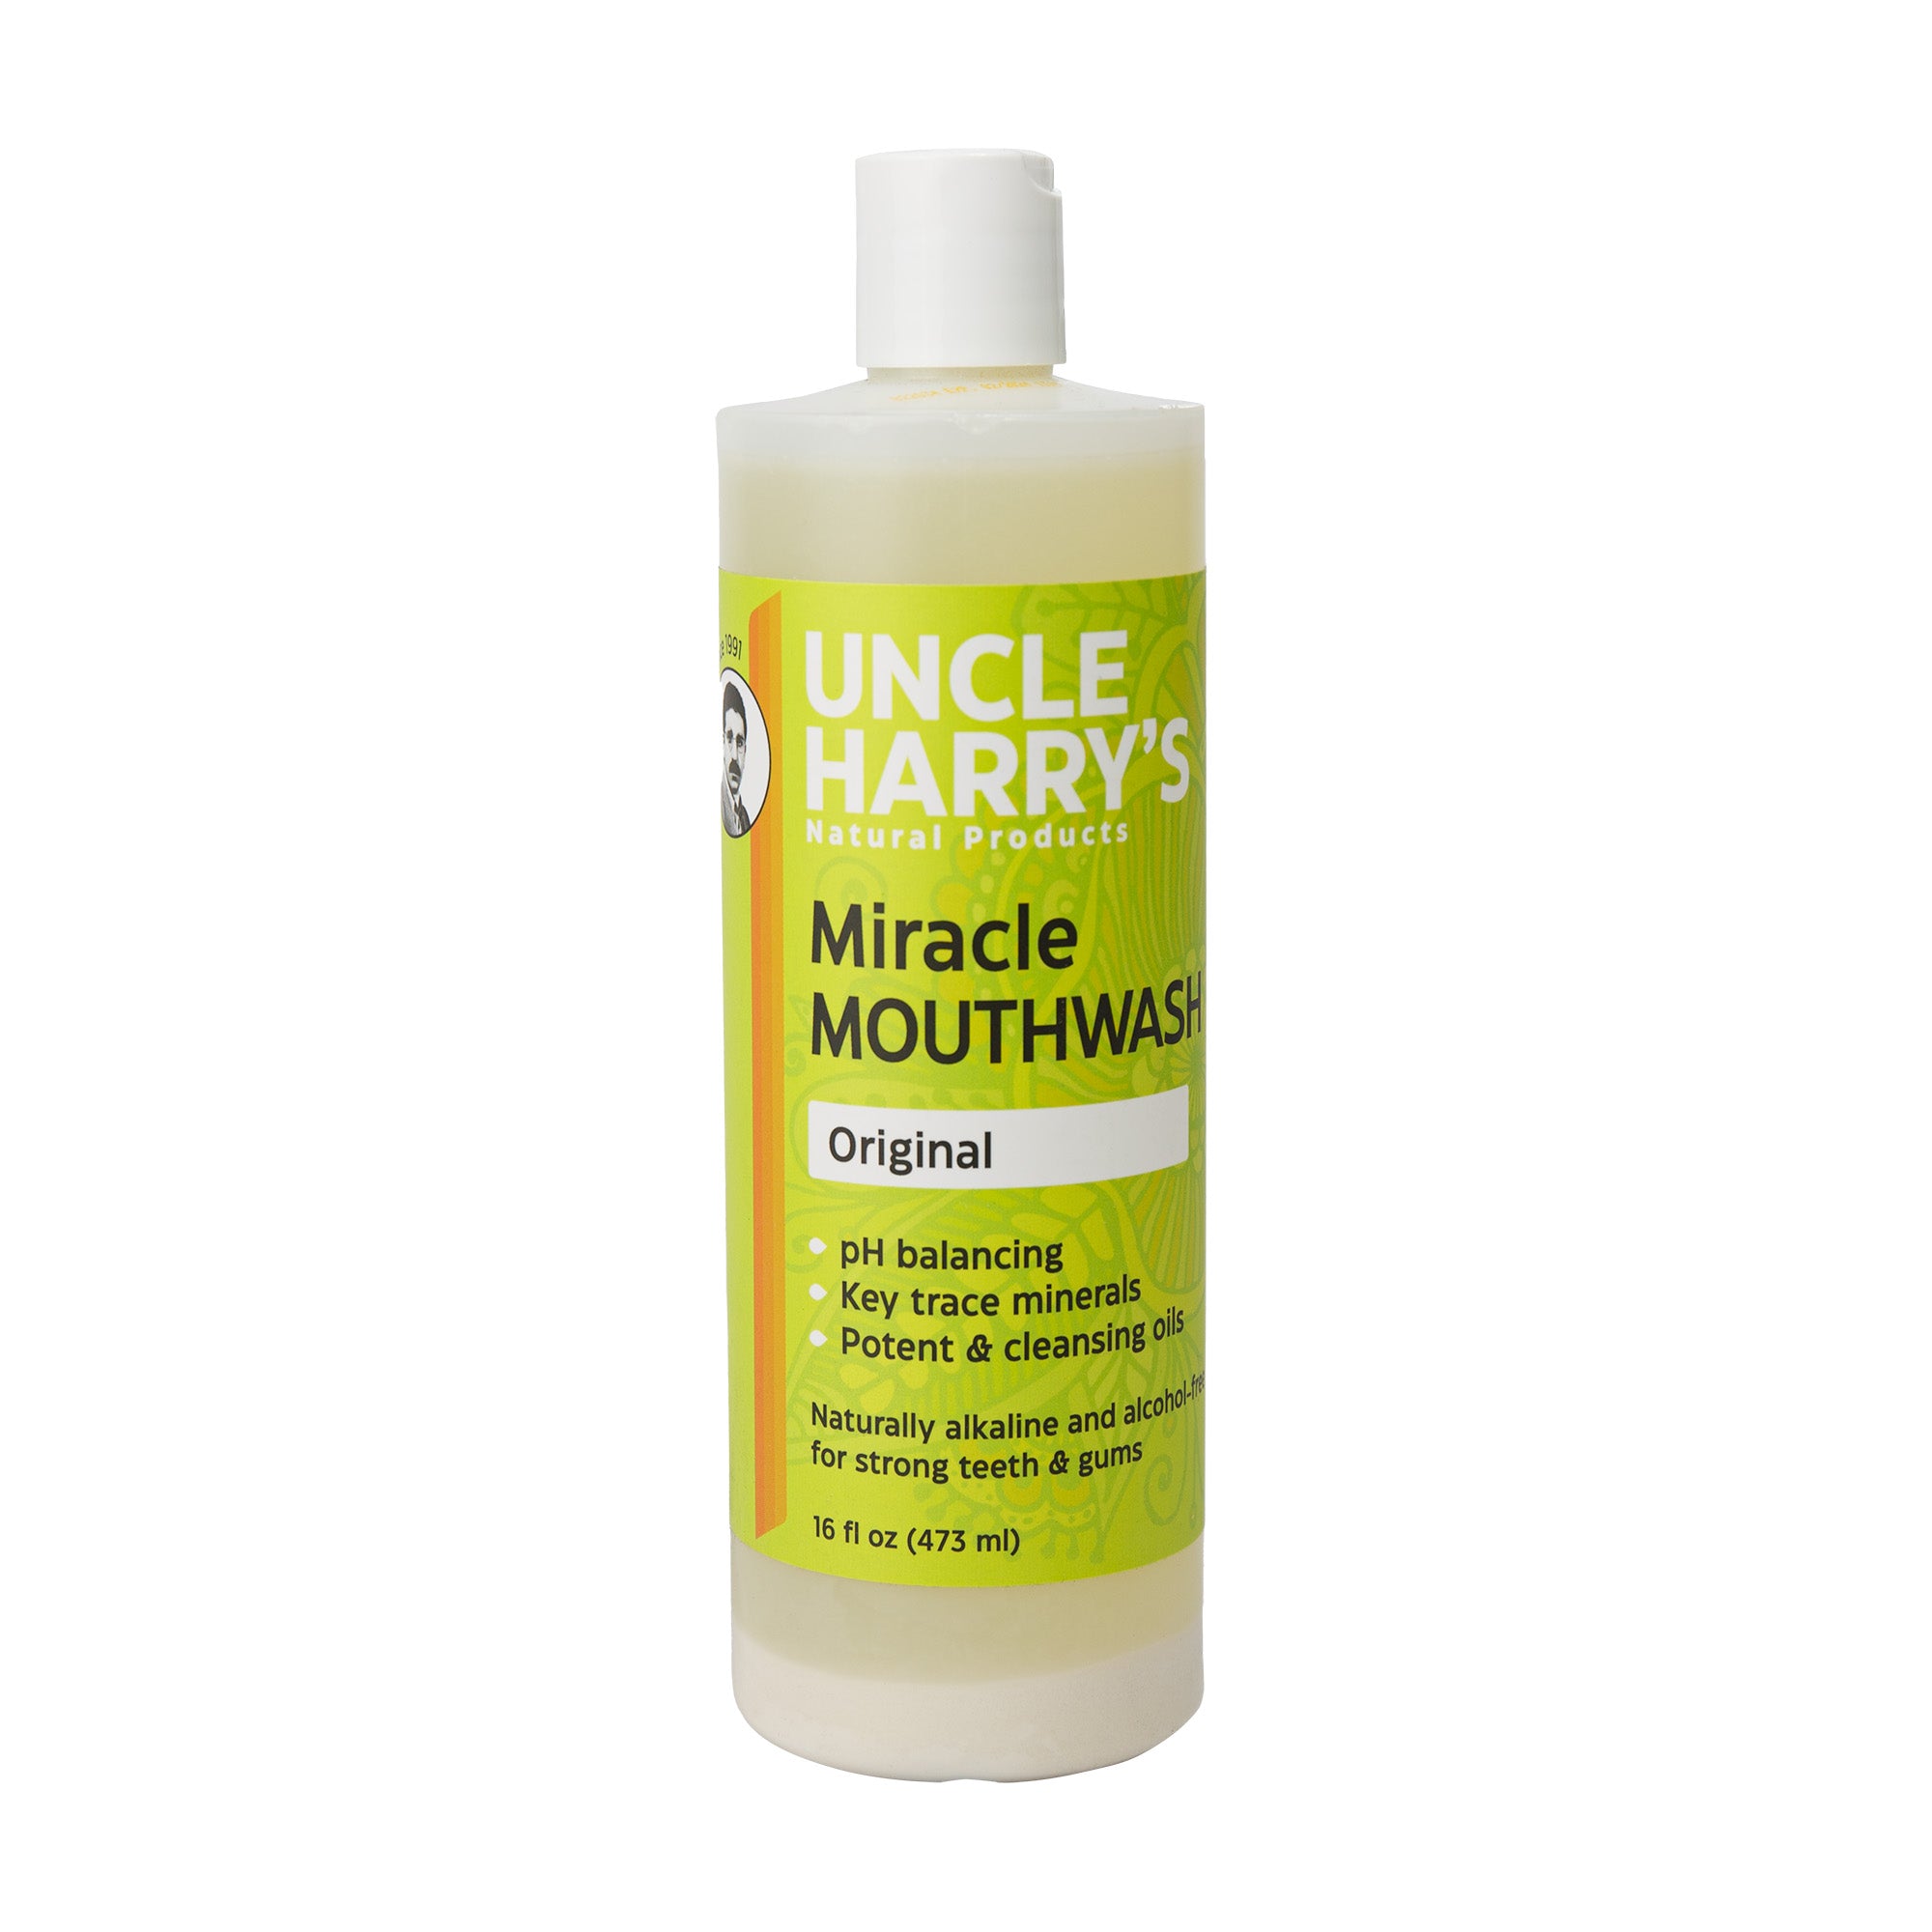 Uncle Harry's Natural Products Miracle Mouthwash (16 fl oz